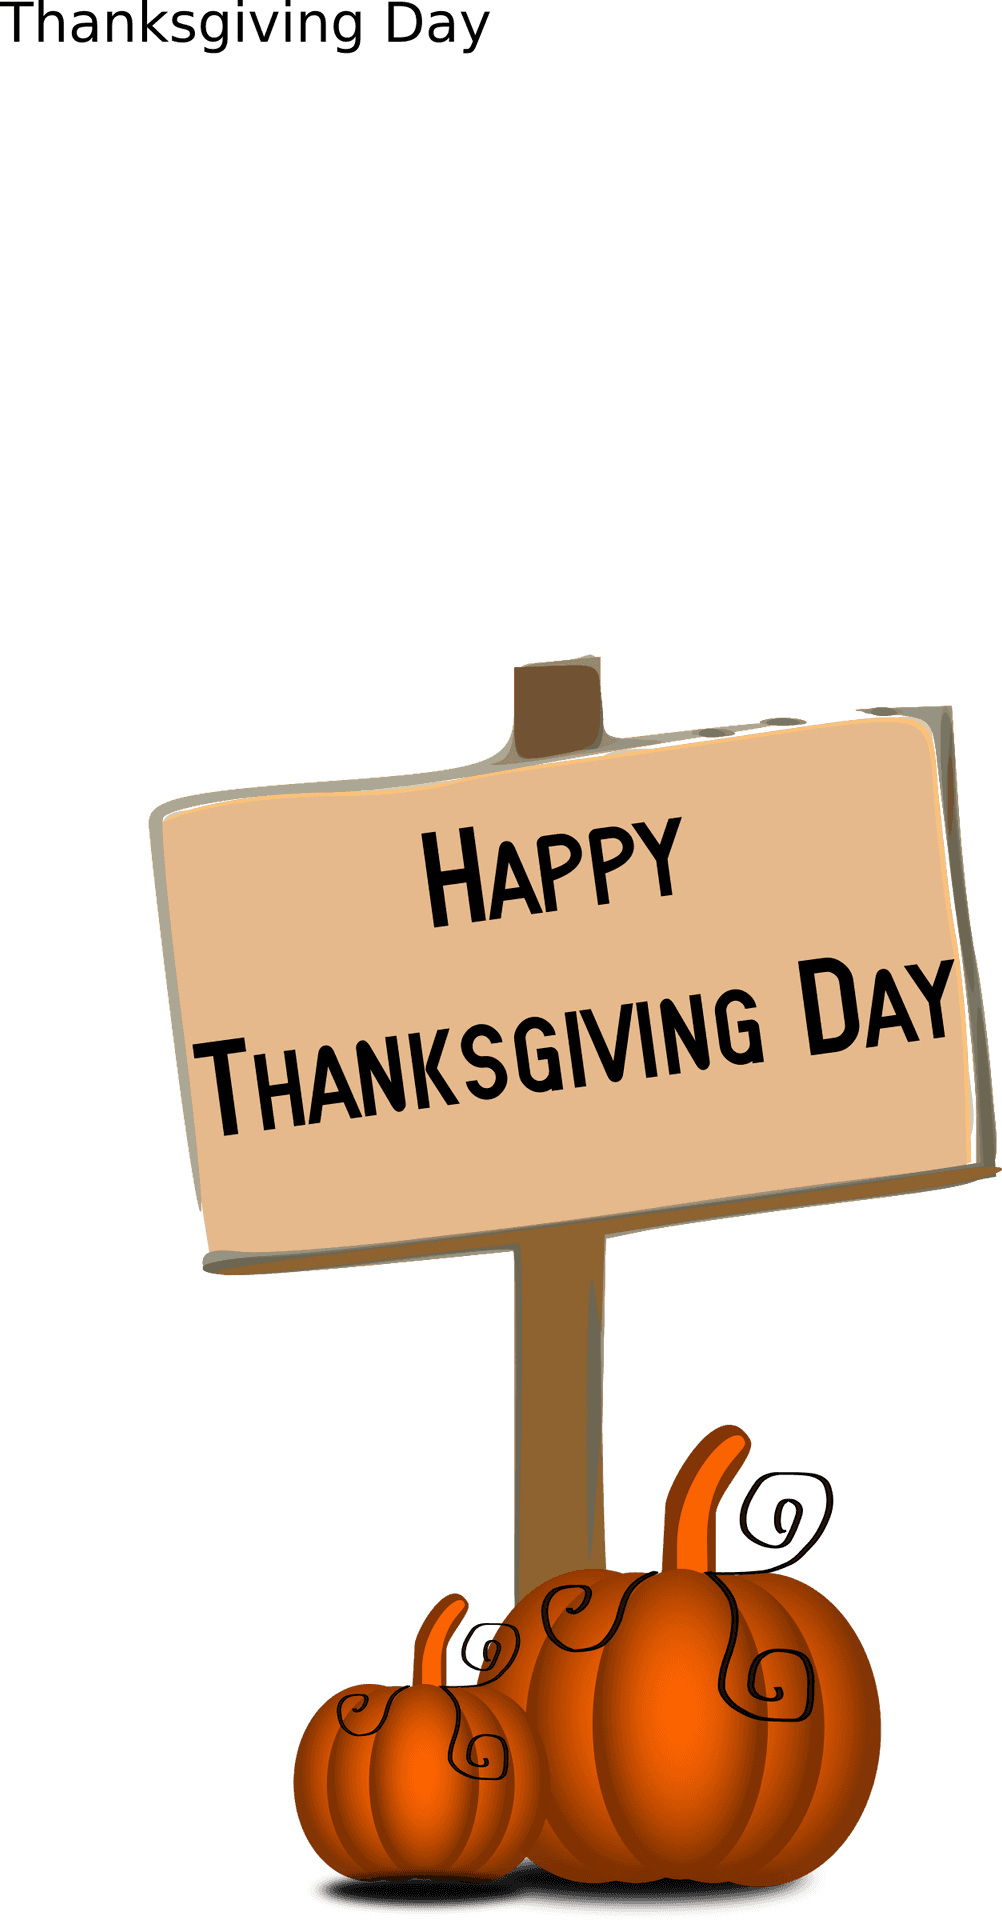 Happy Thanksgiving Day Signand Pumpkins PNG